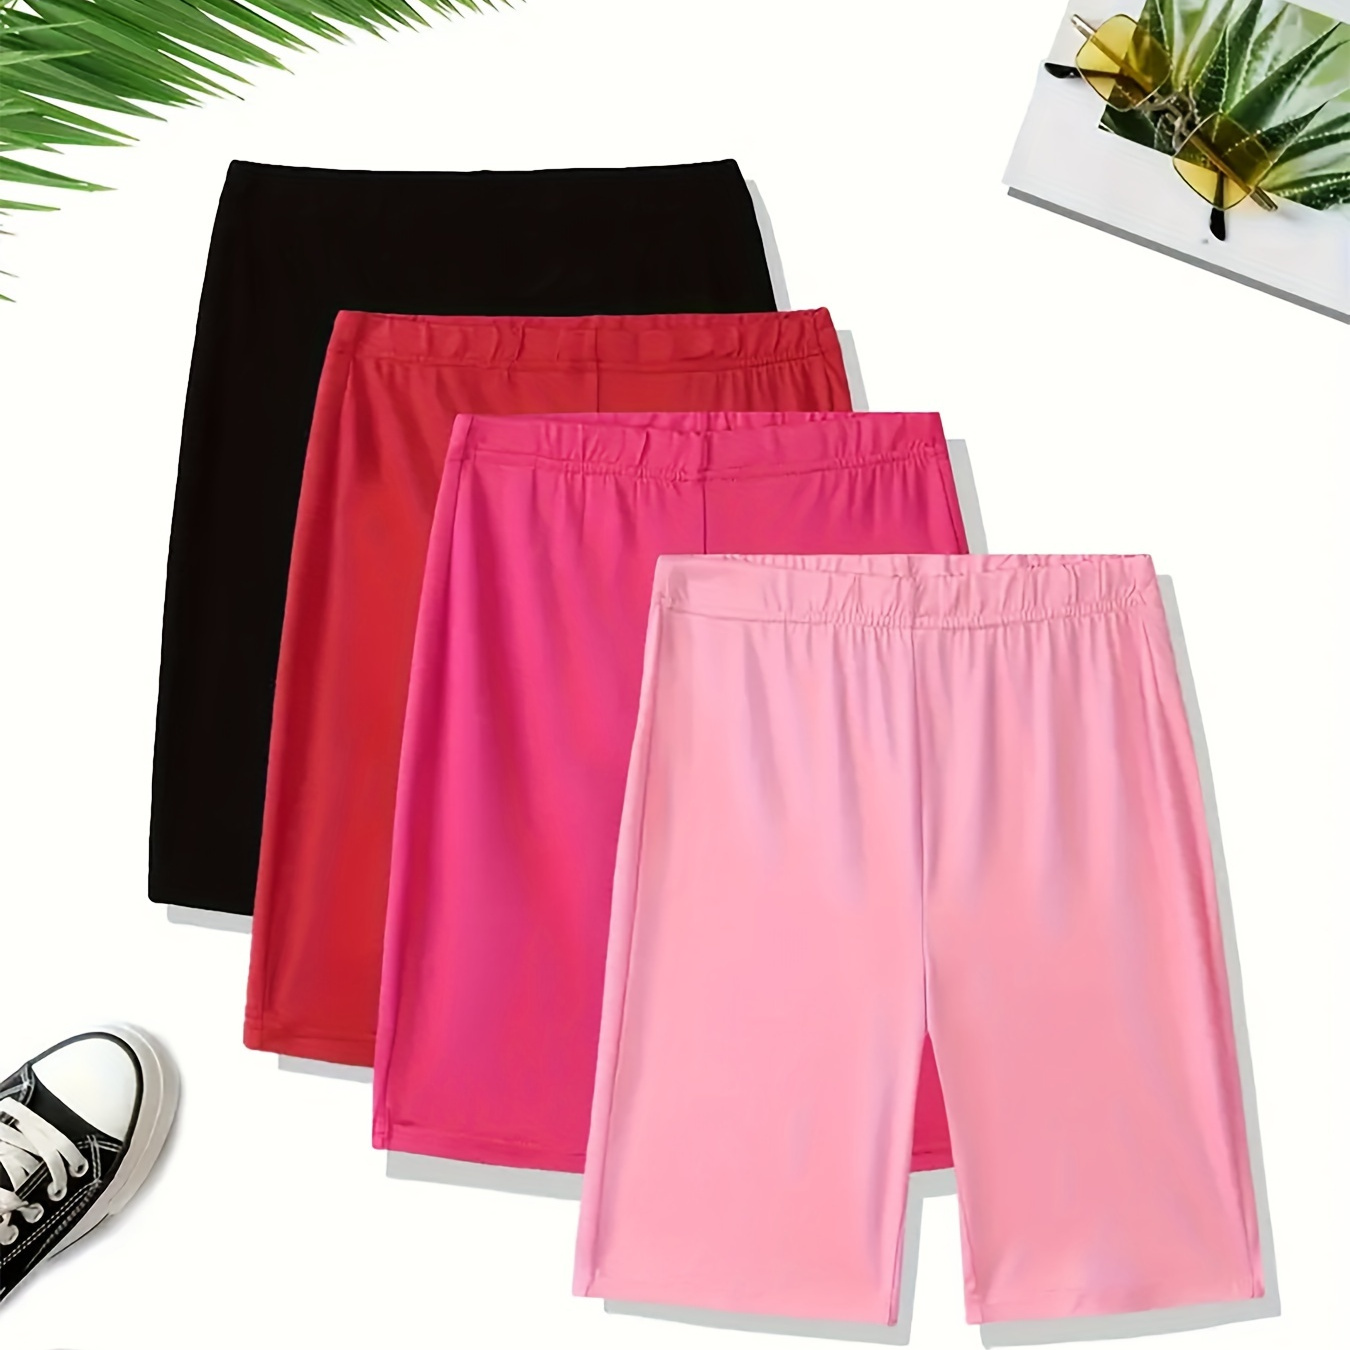 

Women's 4-piece Set Casual Athletic Shorts, Breathable Quick-dry Sports Wear, Elastic Waistband, Solid Colors